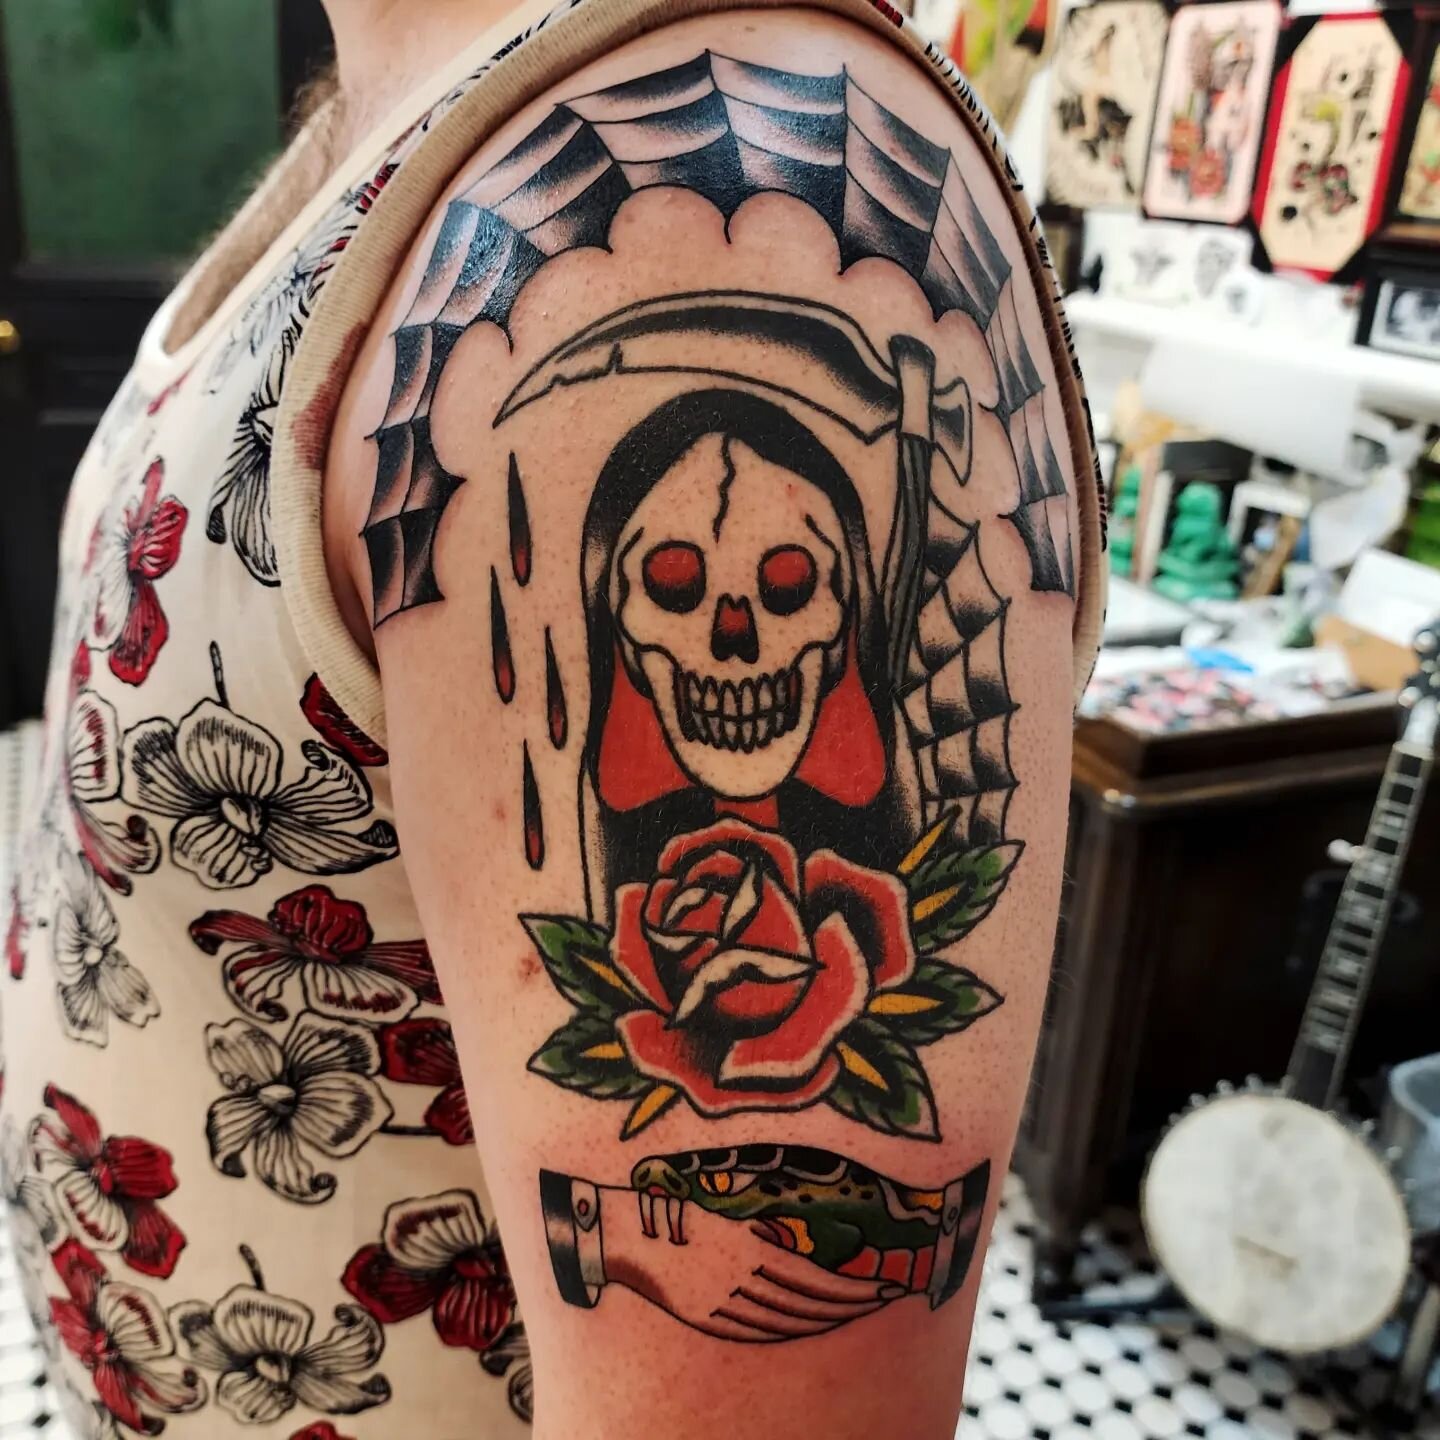 Newest addition. Done by Hunter- Bewitched Body Art. Jonesboro, AR : r/ tattoos